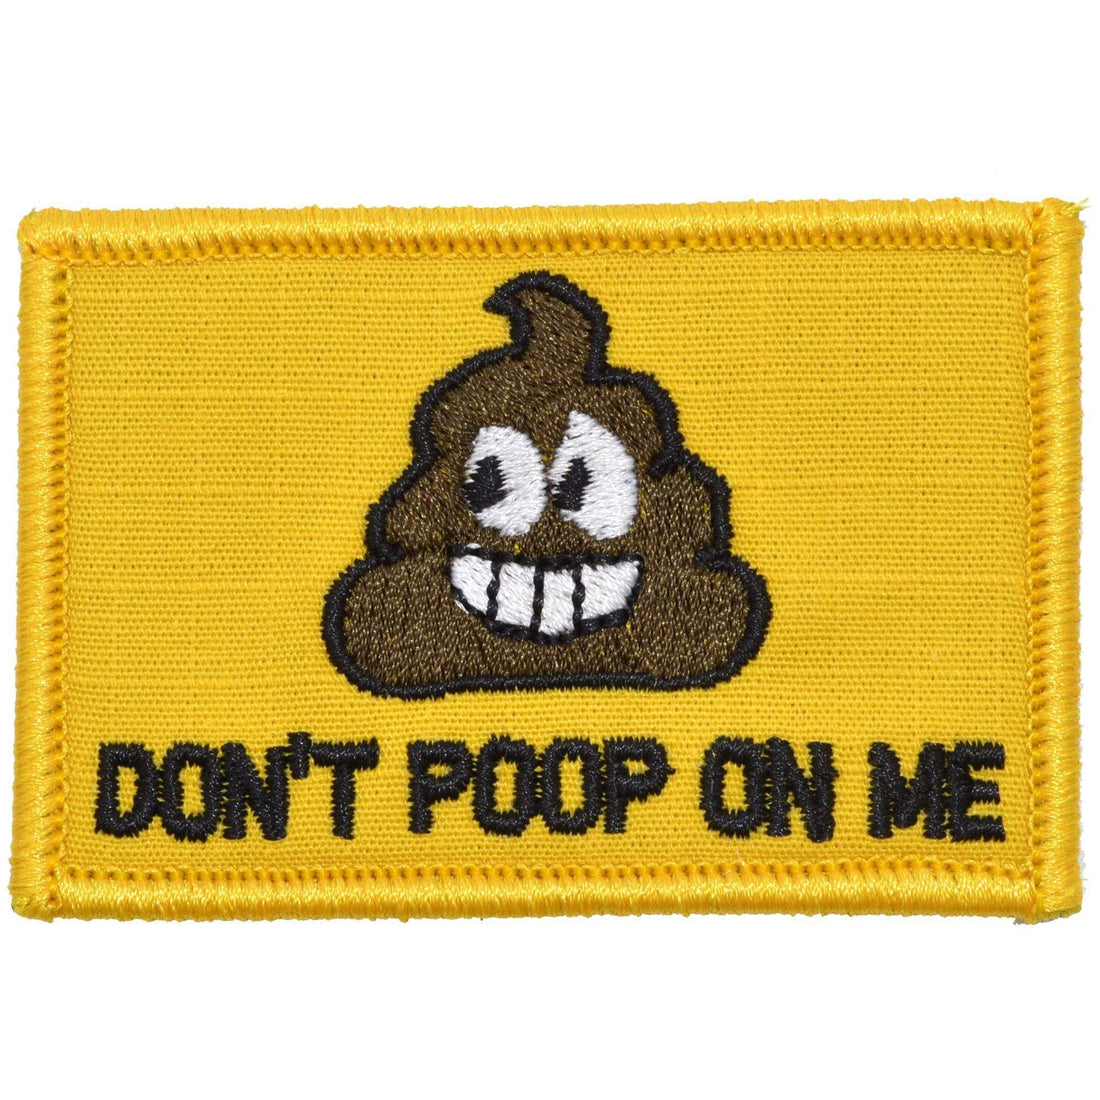 Don't Poop On Me - 2x3 Patch